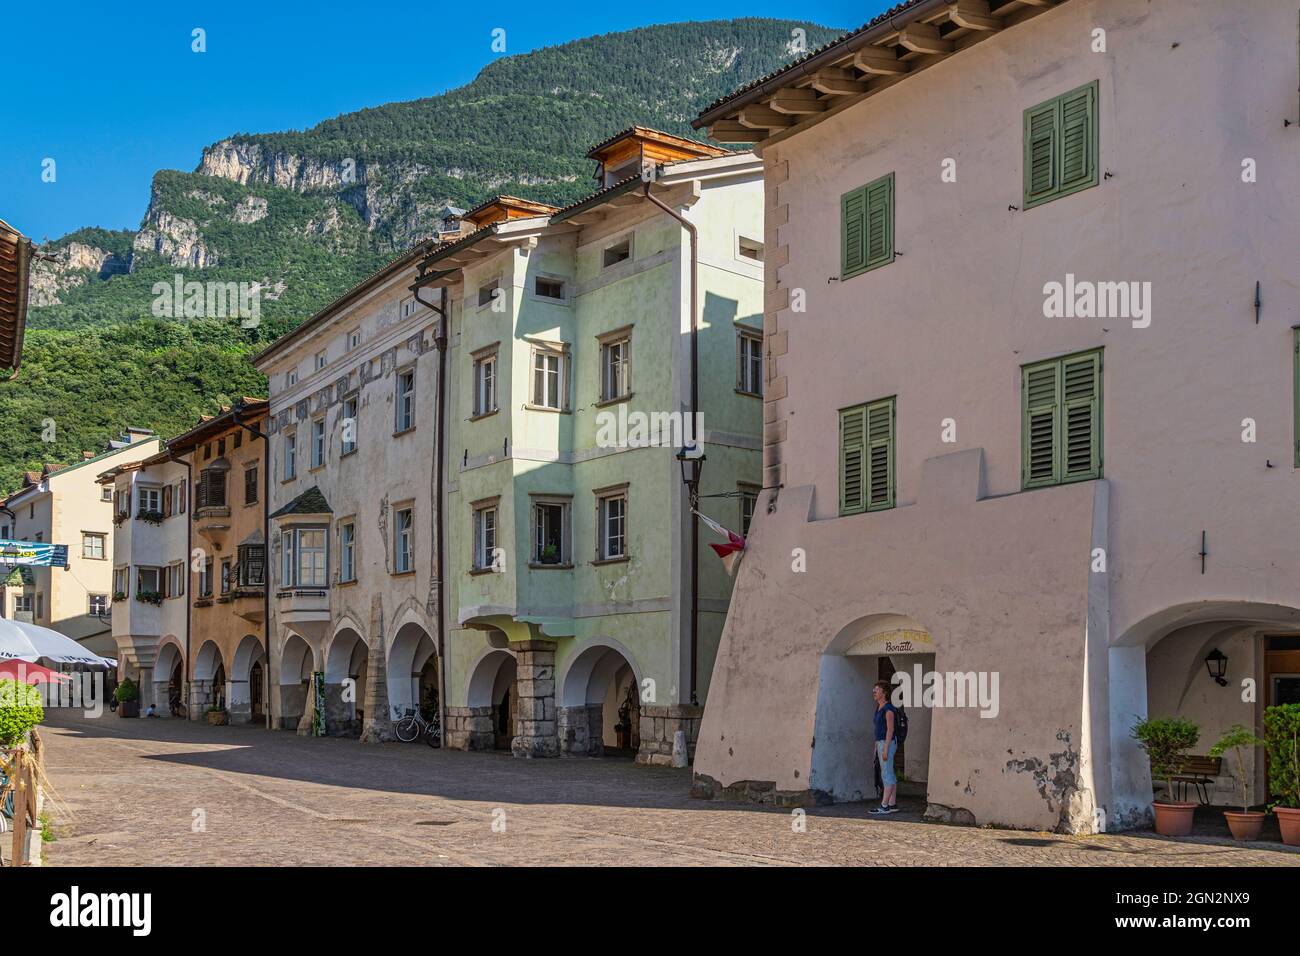 Characteristic houses of the ancient medieval center of Egna. The lowered arcades and the colored facades are a characteristic of this village. Stock Photo